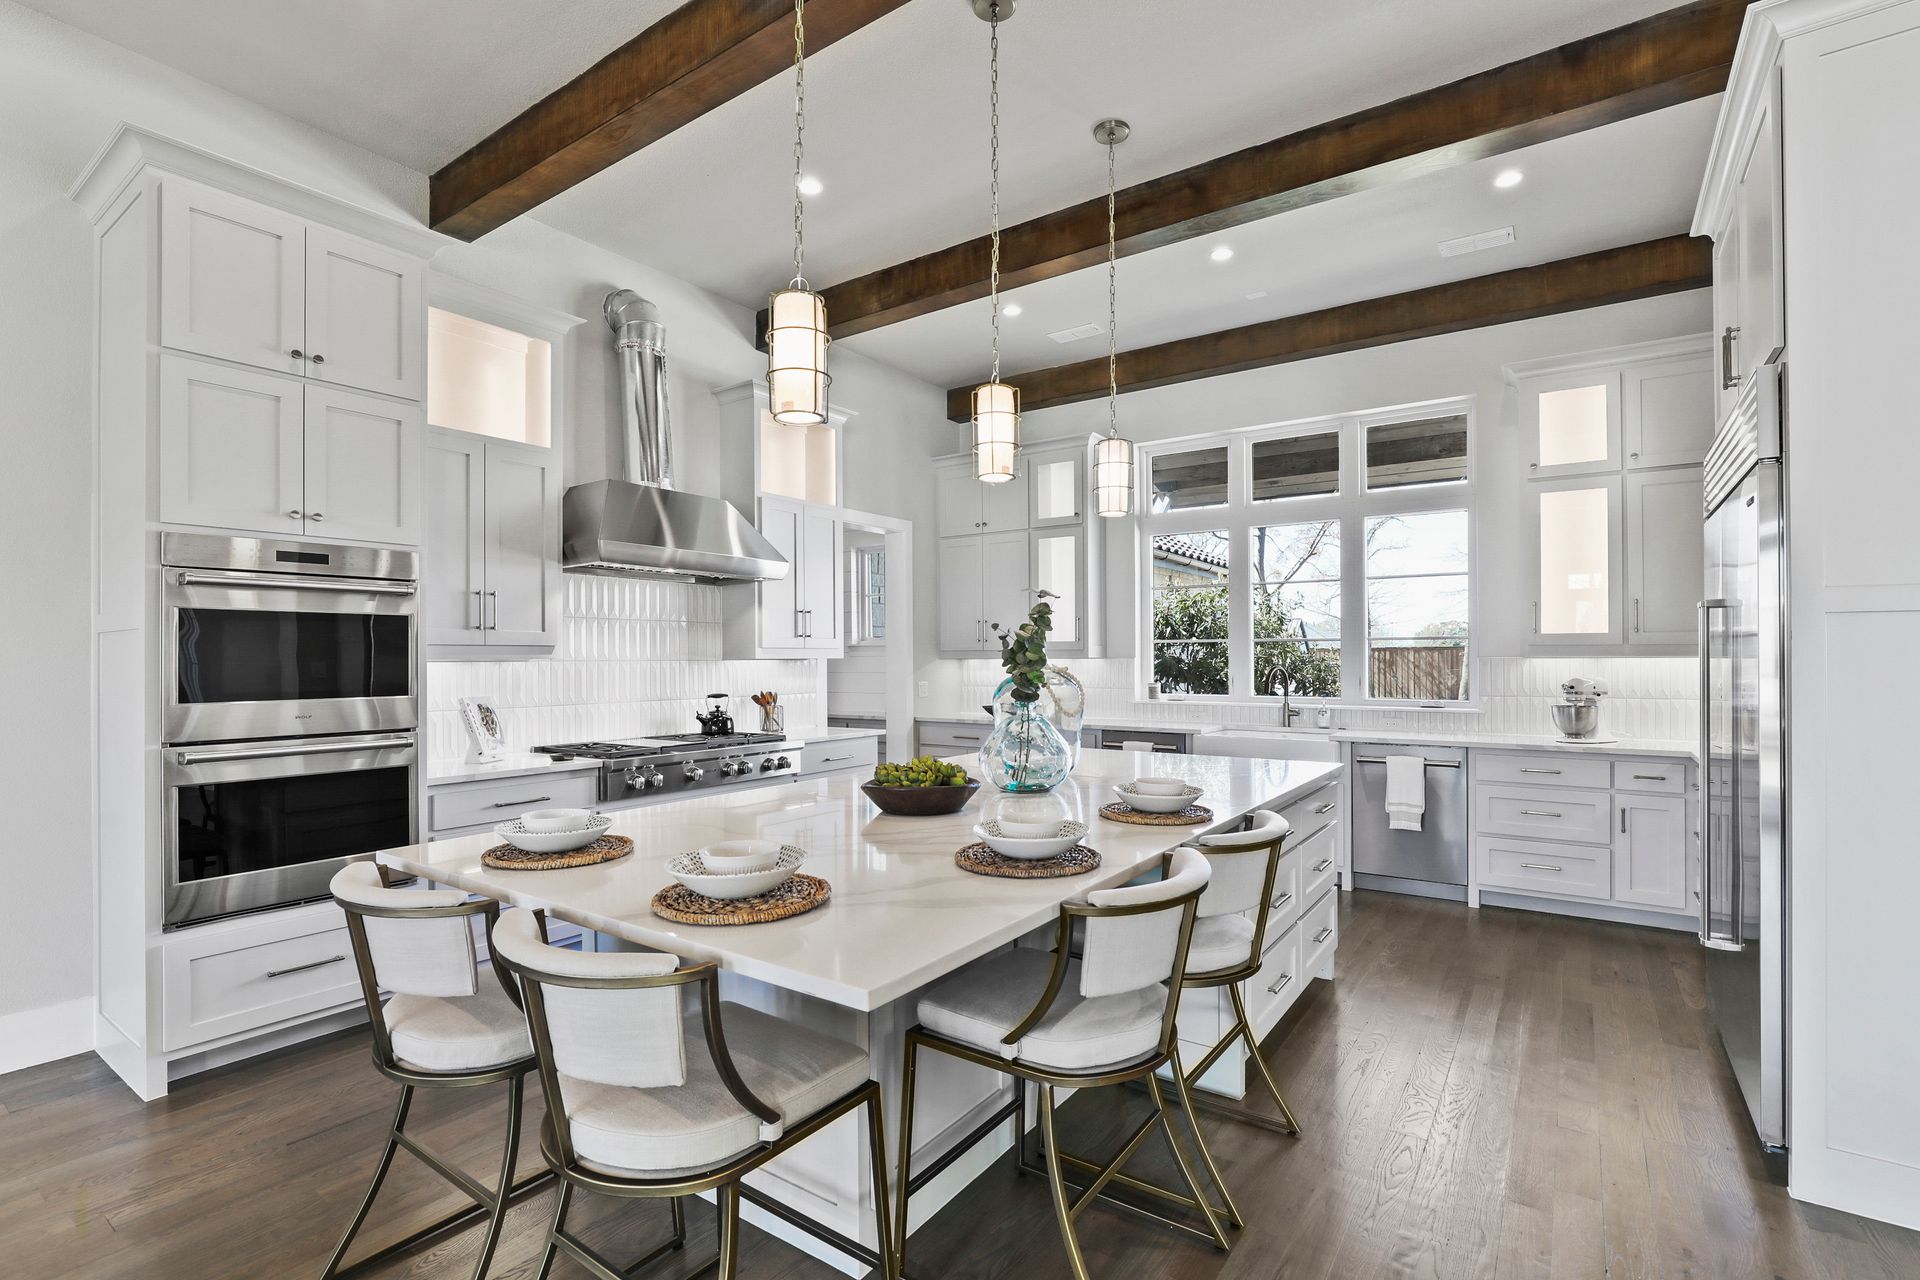  A modern kitchen in a custom-built home with white cabinets, stainless steel appliances, a central island with seating, pendant lights, and wooden beams on the ceiling.
